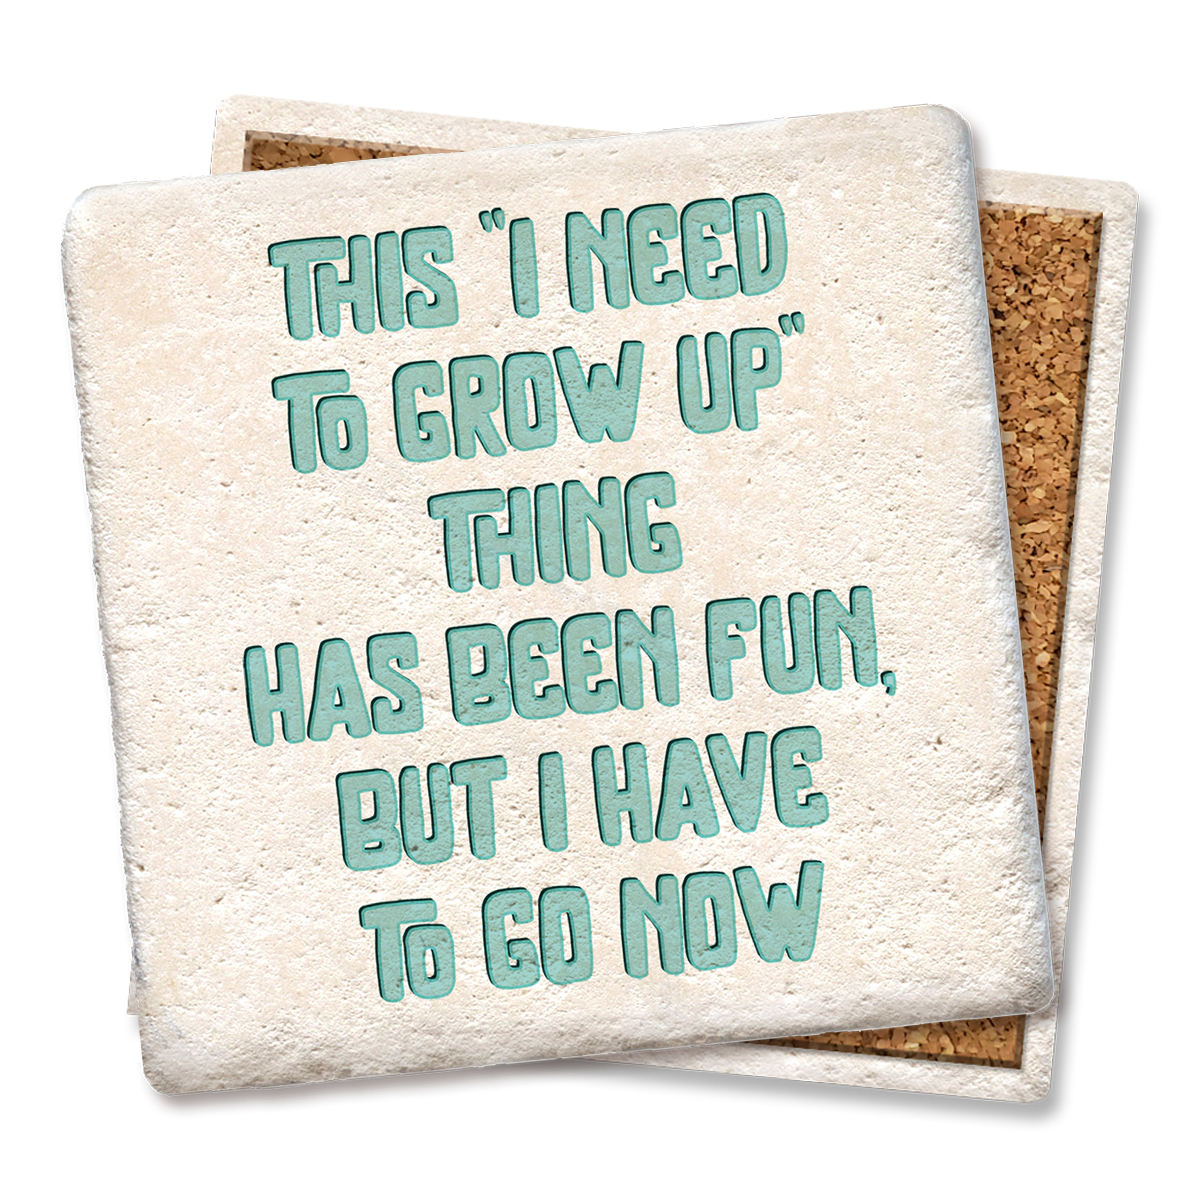 This "I need to grow up thing" coaster